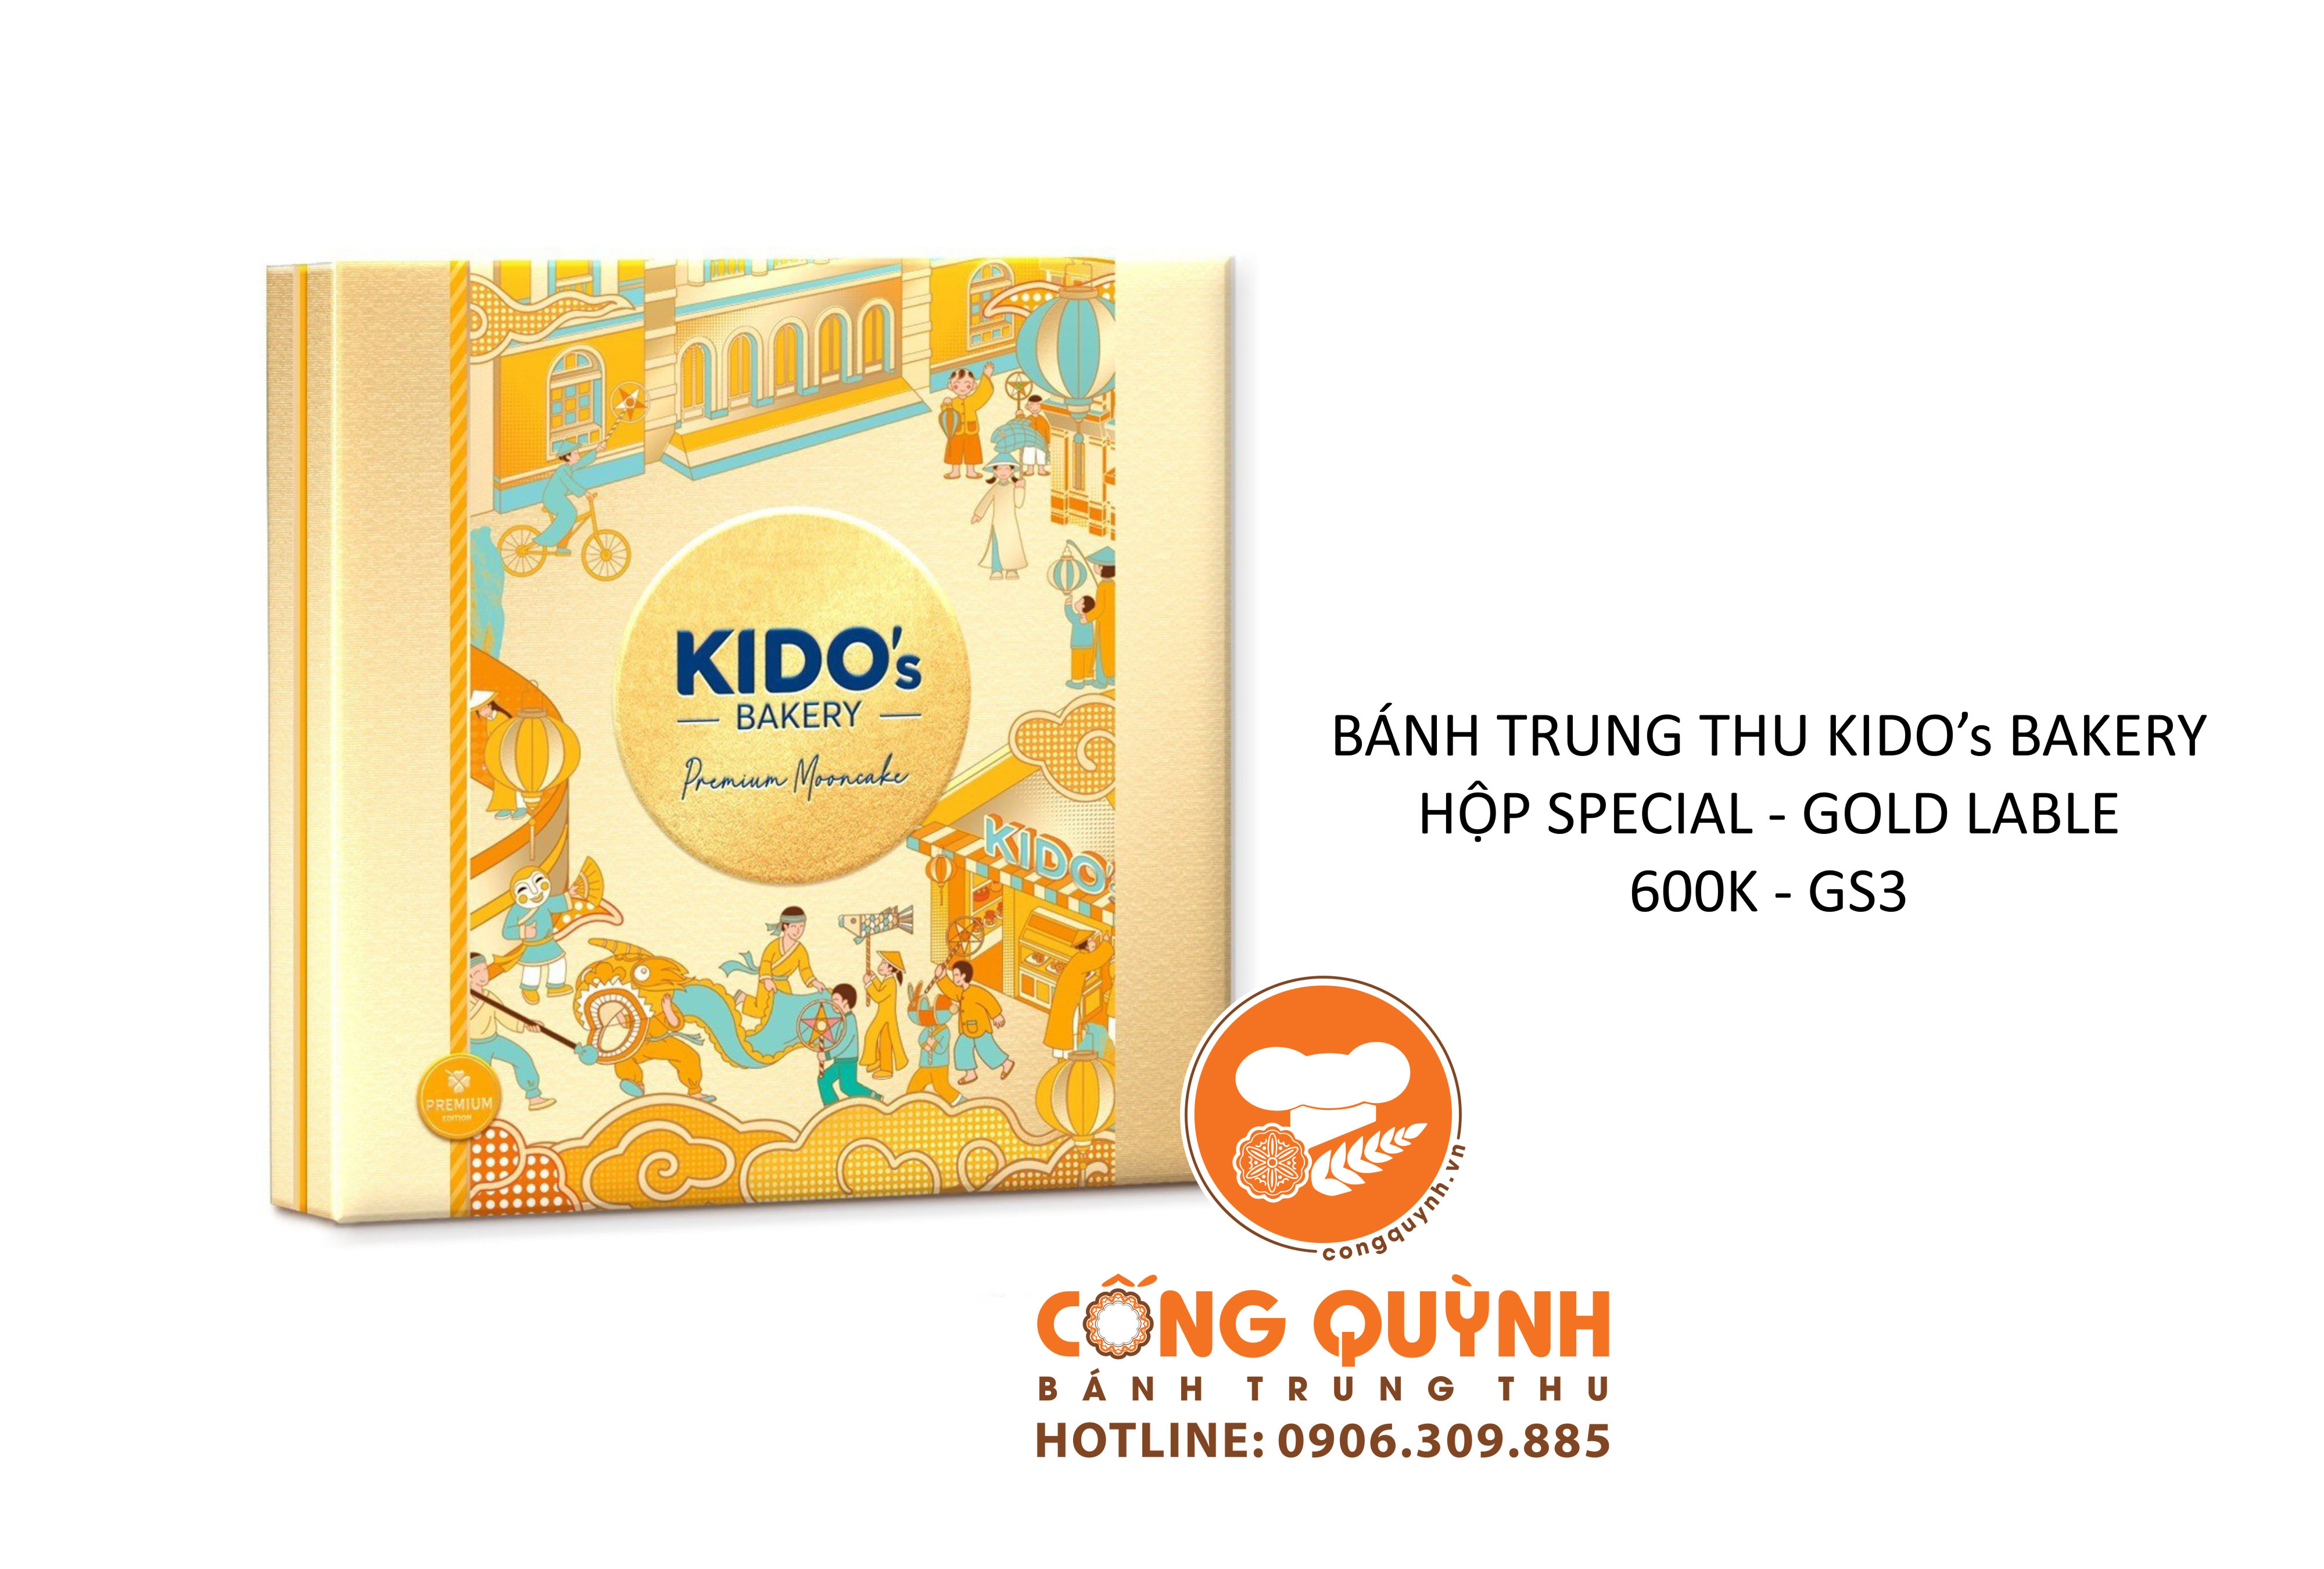 Bánh trung thu Kido - Hộp Special Gold Label